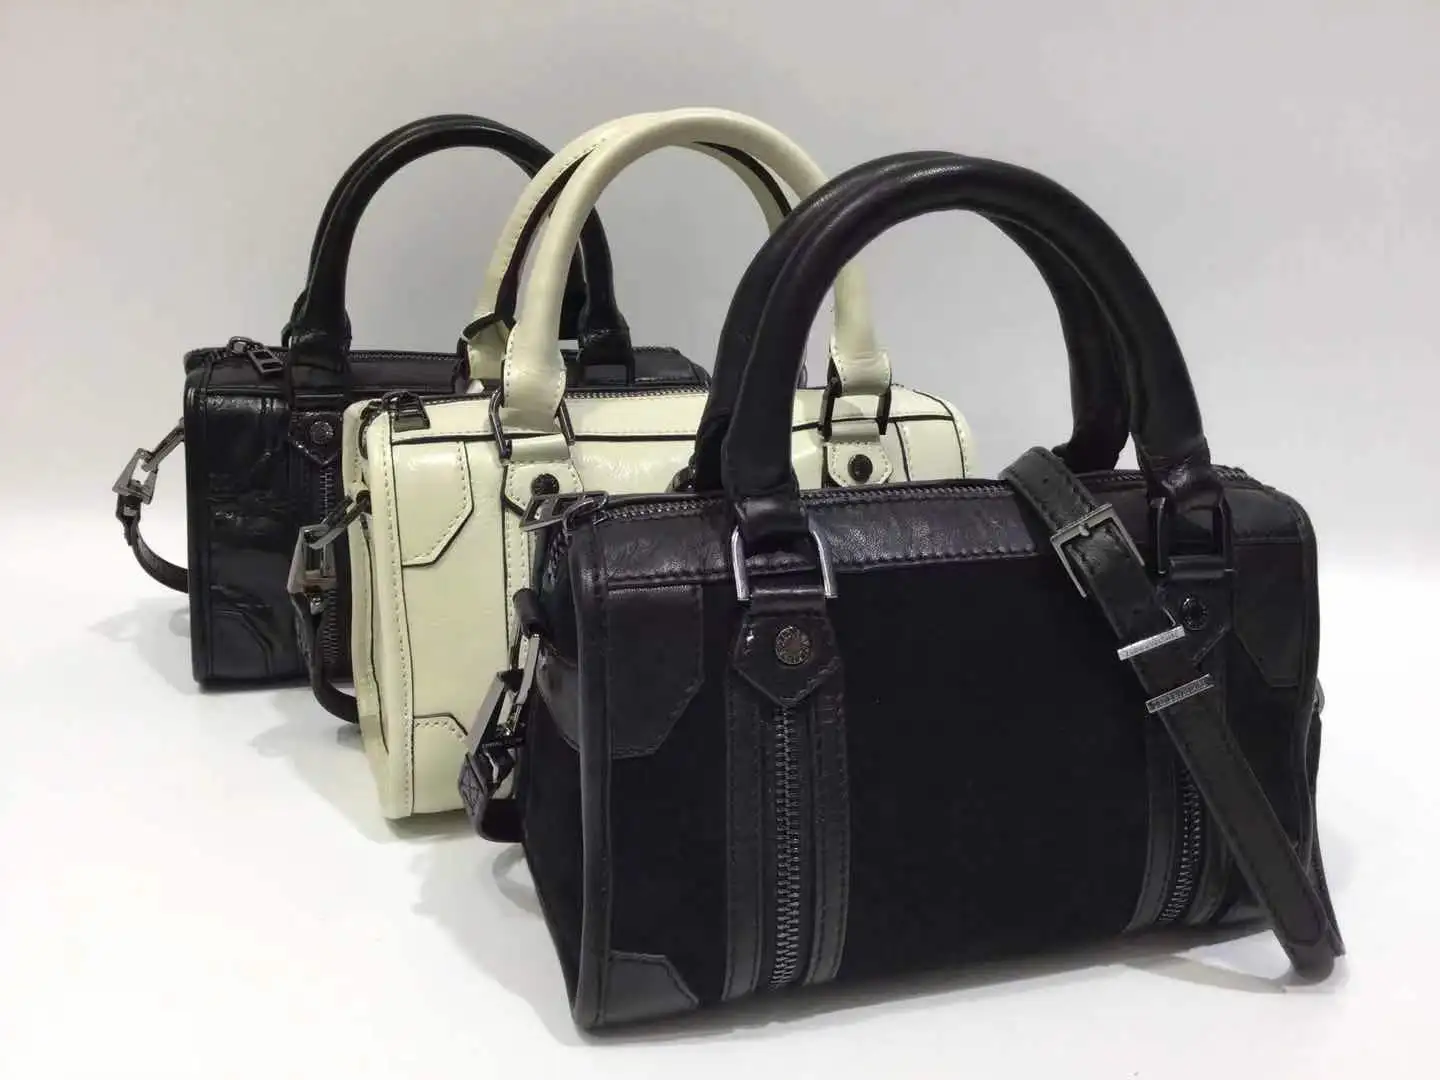 

New Women's Sunny XS Vintage Patent Bag Ladies Small Black Grained Leather Shoulder Bag Hand Bag With Removable Adjustable Strap